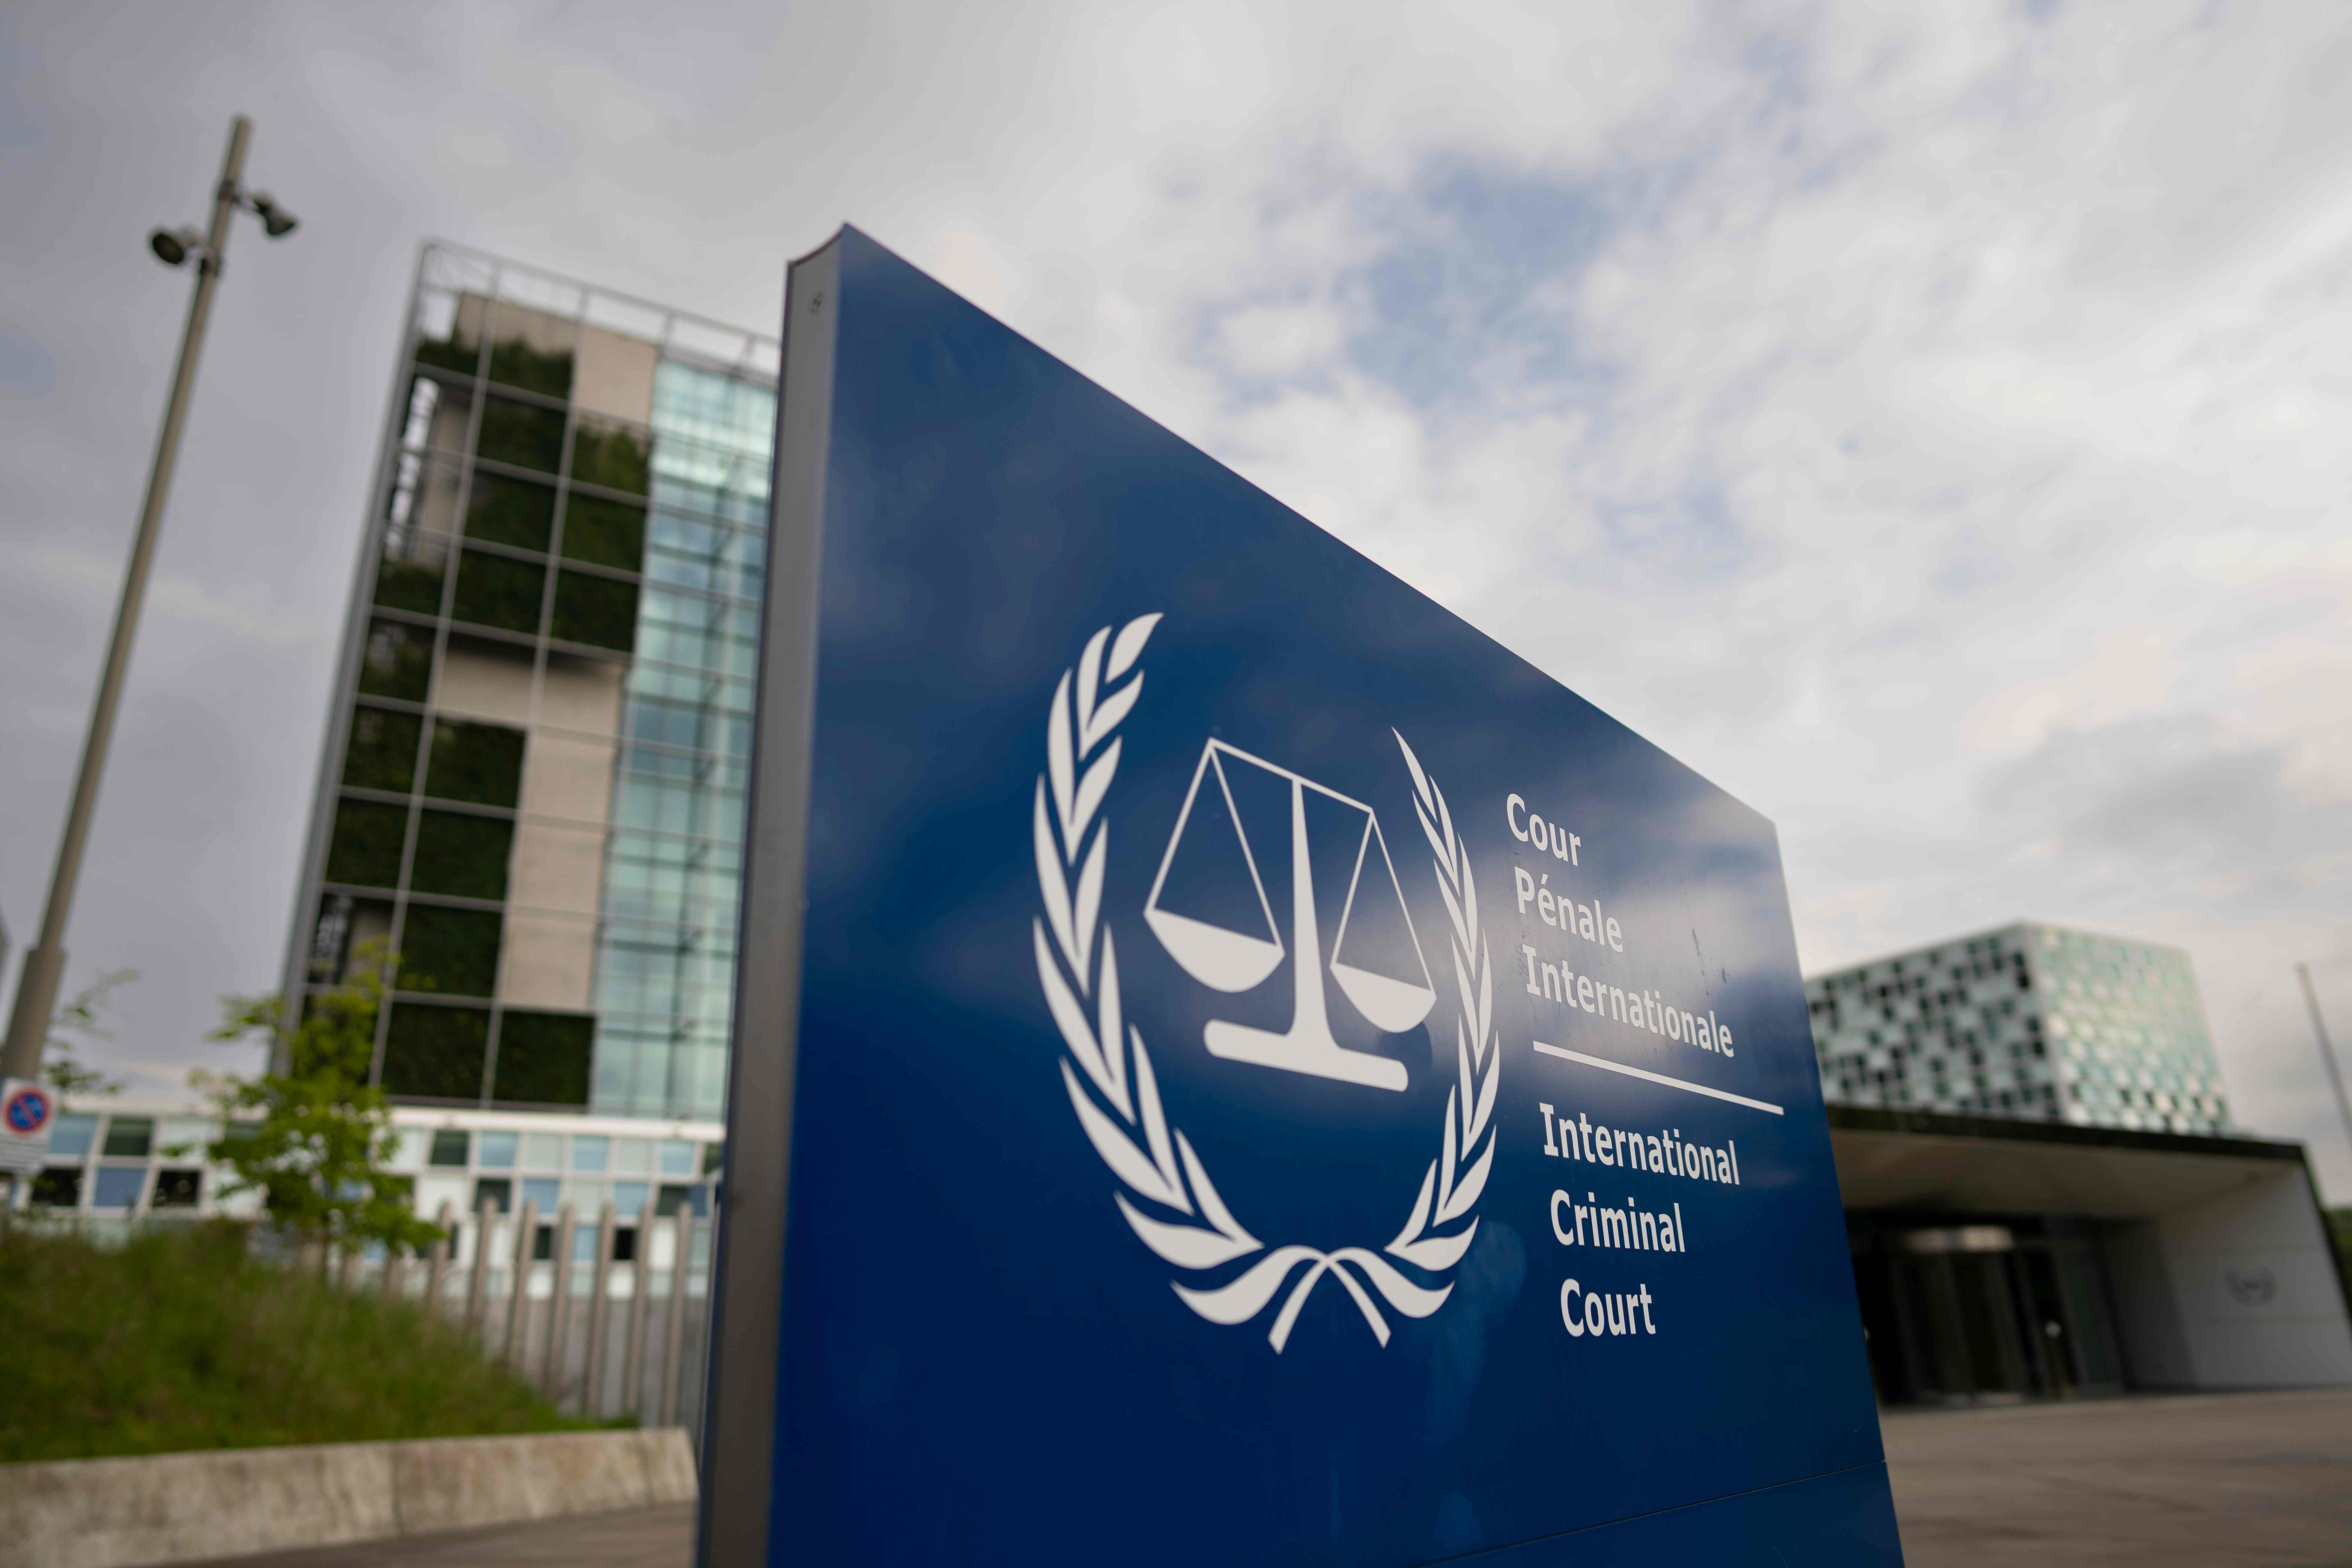 The International Criminal Court (ICC) is seeking arrest warrants for Israeli Prime Minister Benjamin Netanyahu and other leaders from Israel and Hamas.